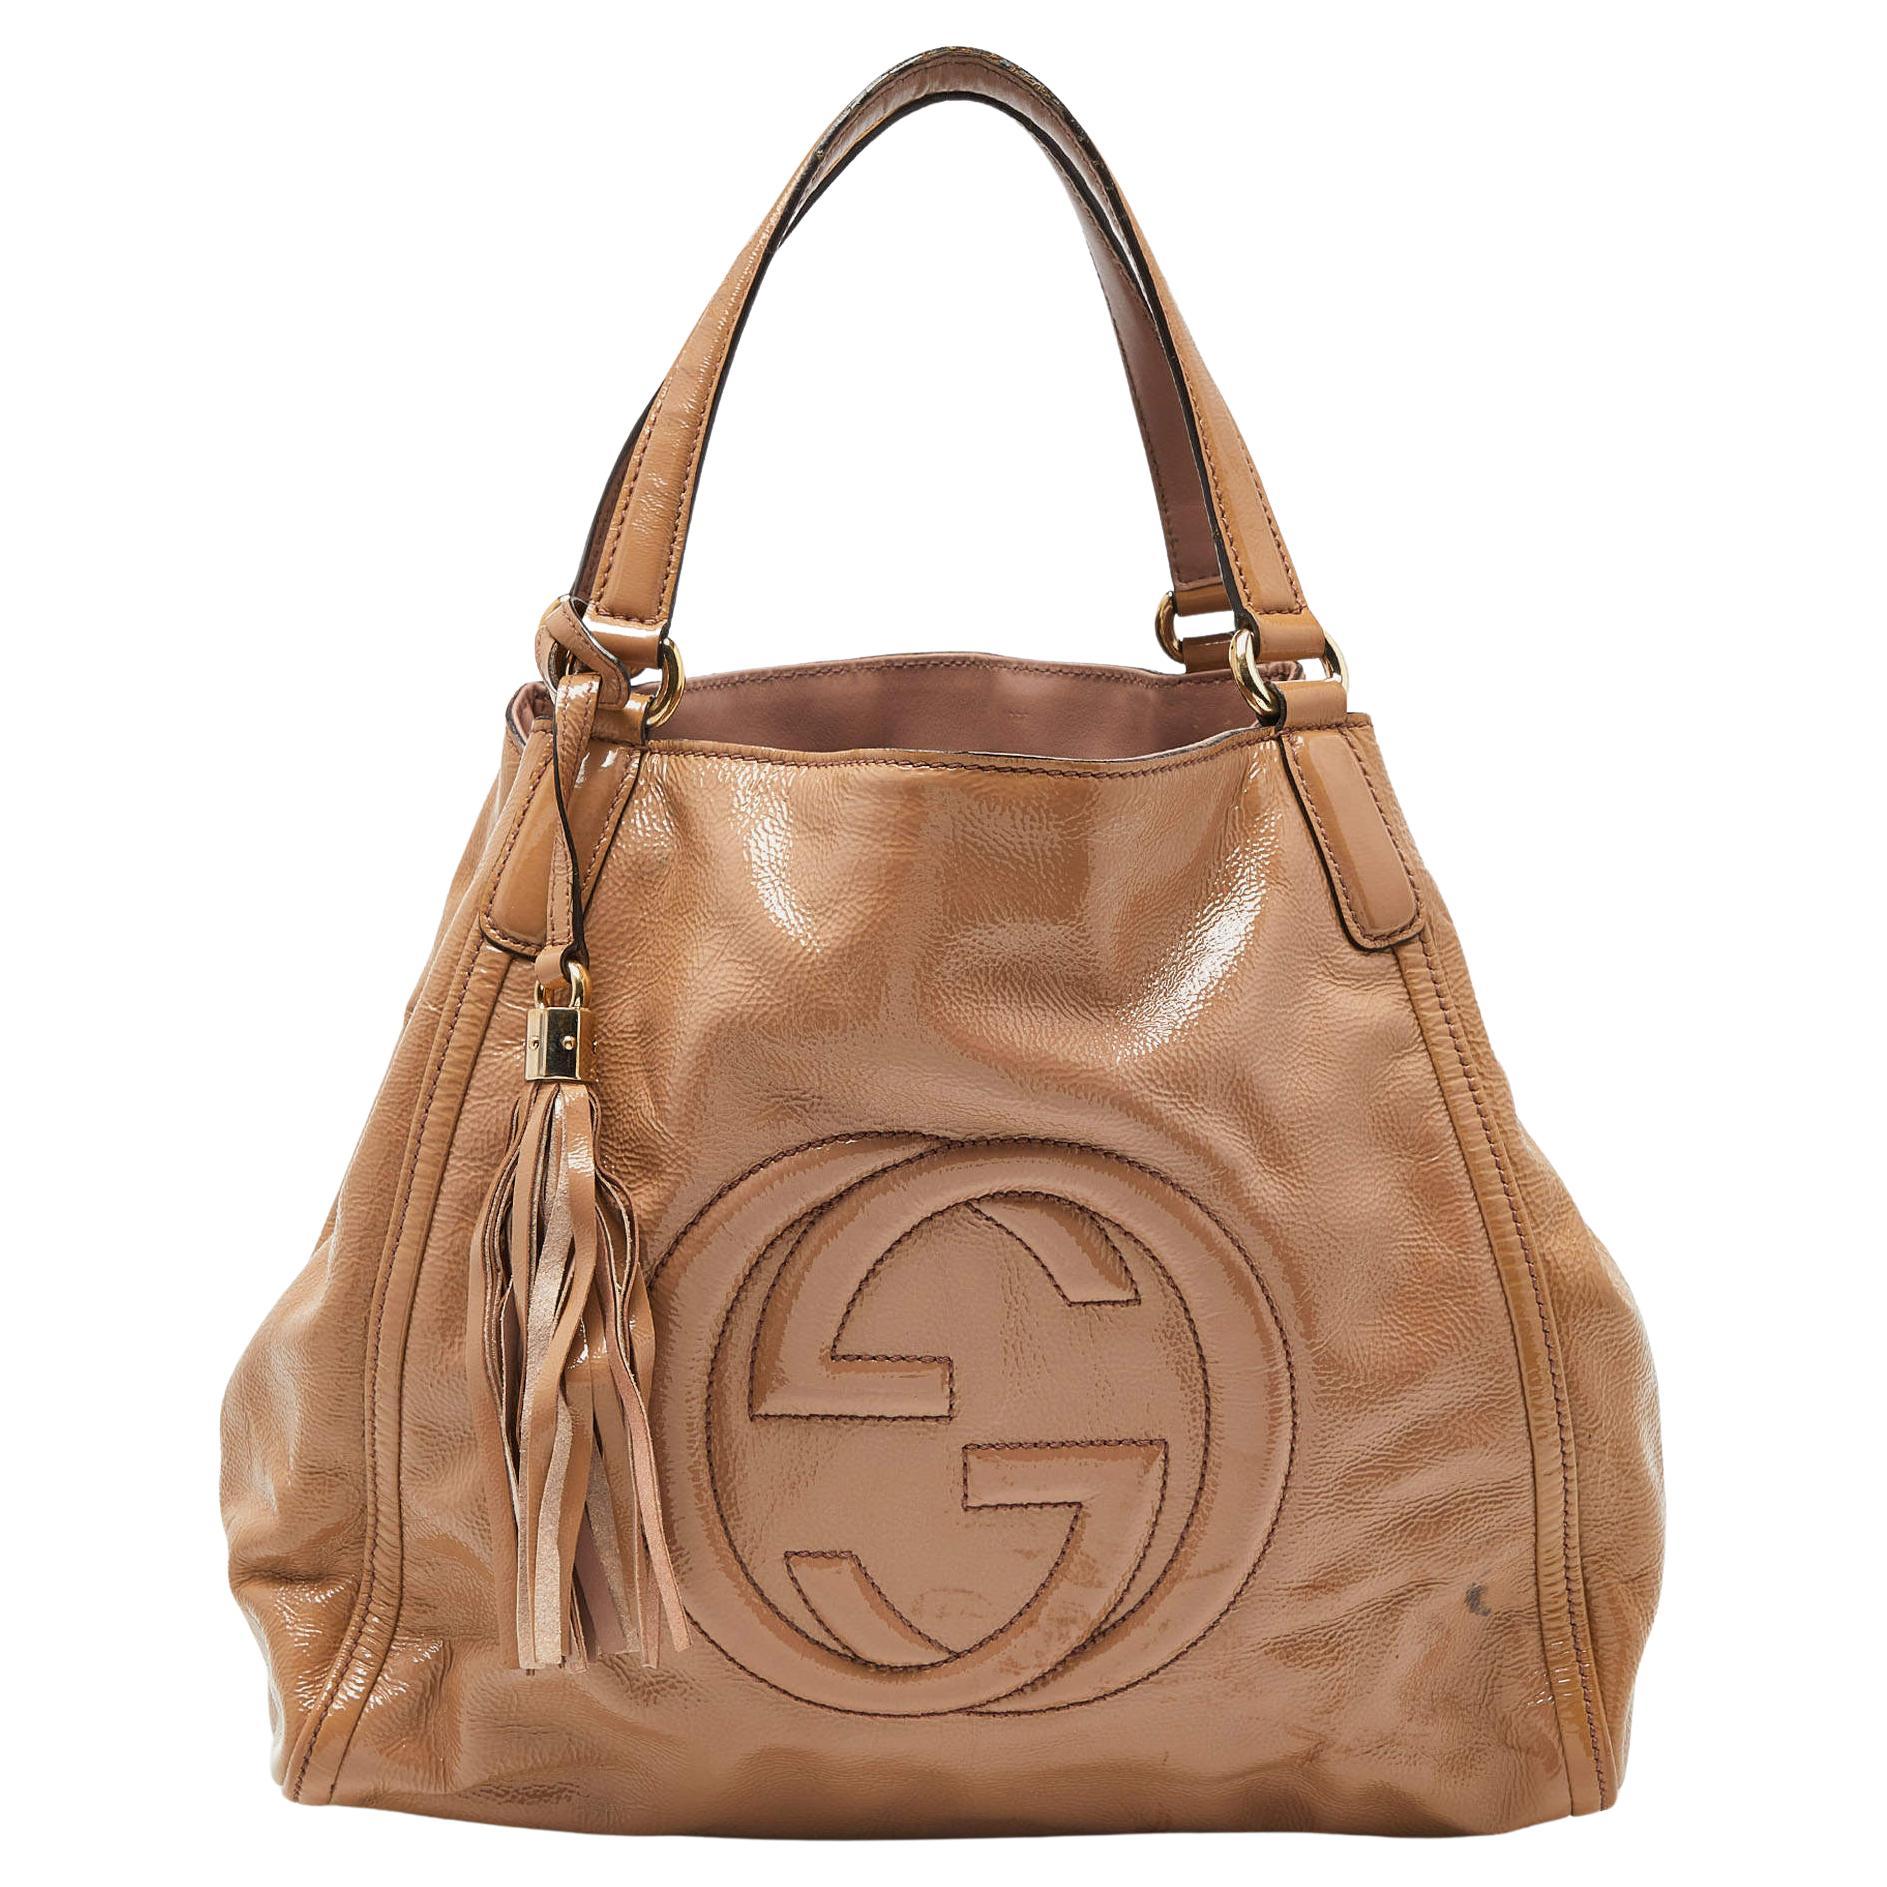 Gucci Beige Patent Leather Small Soho Tote For Sale